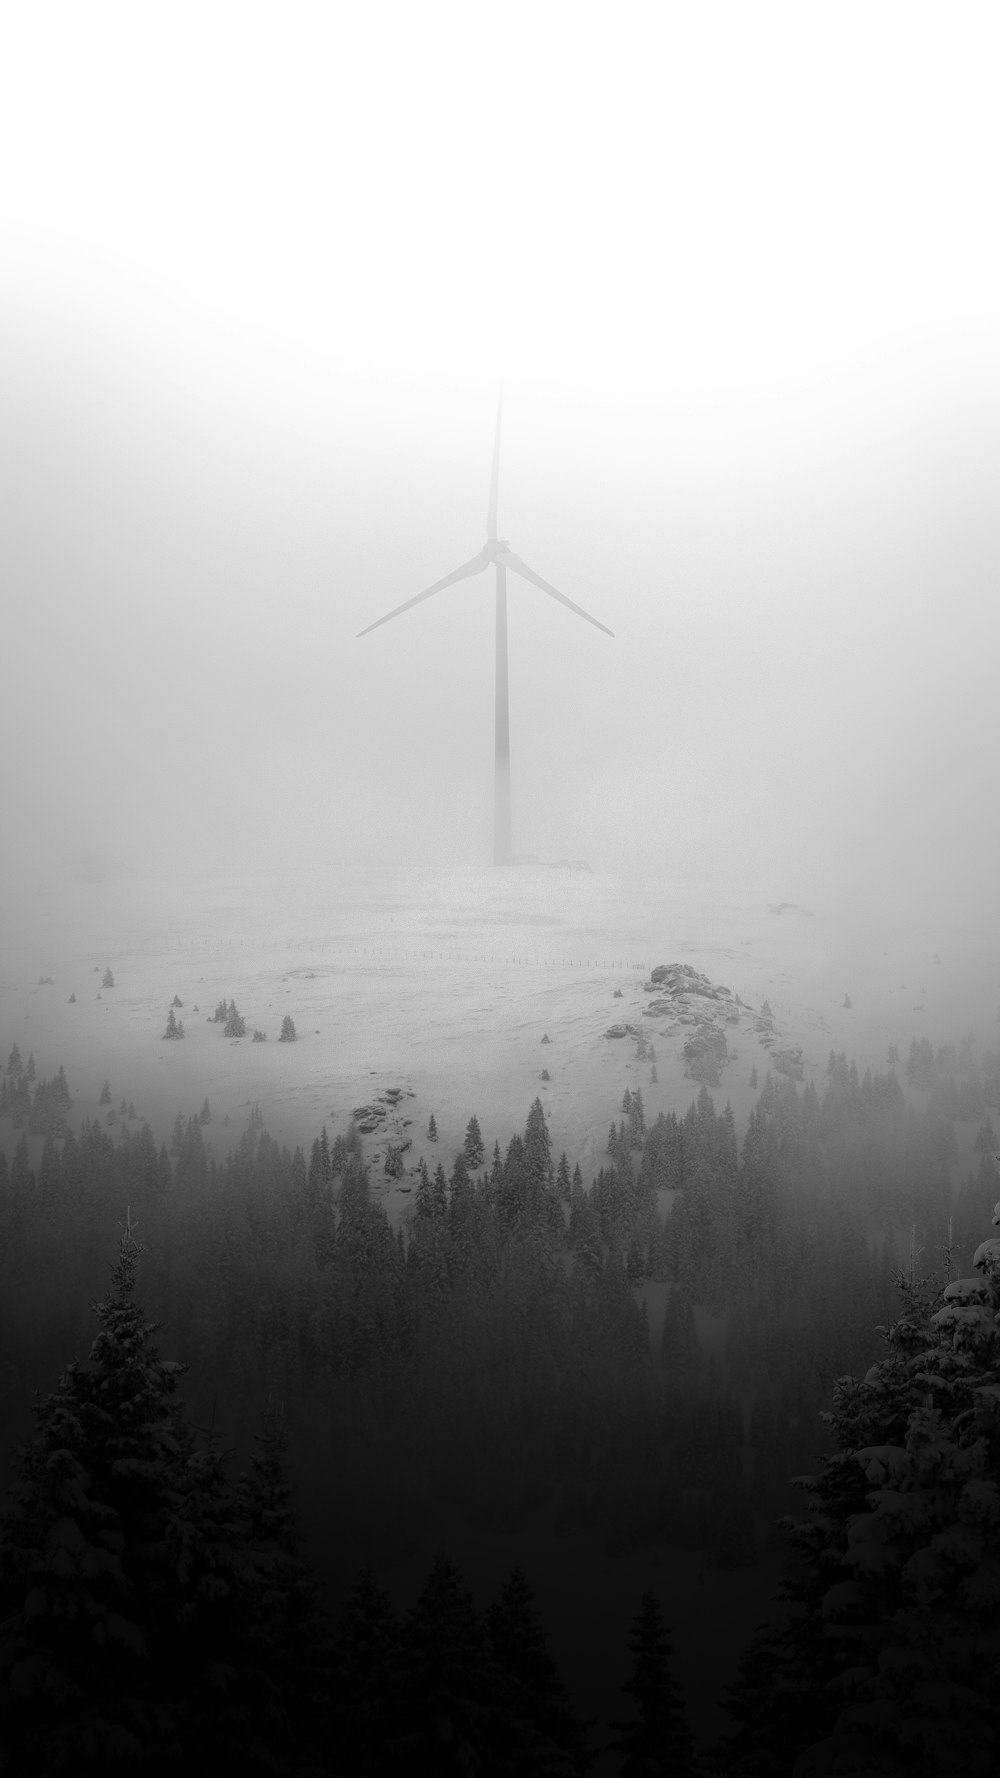 a wind farm in the middle of a foggy forest